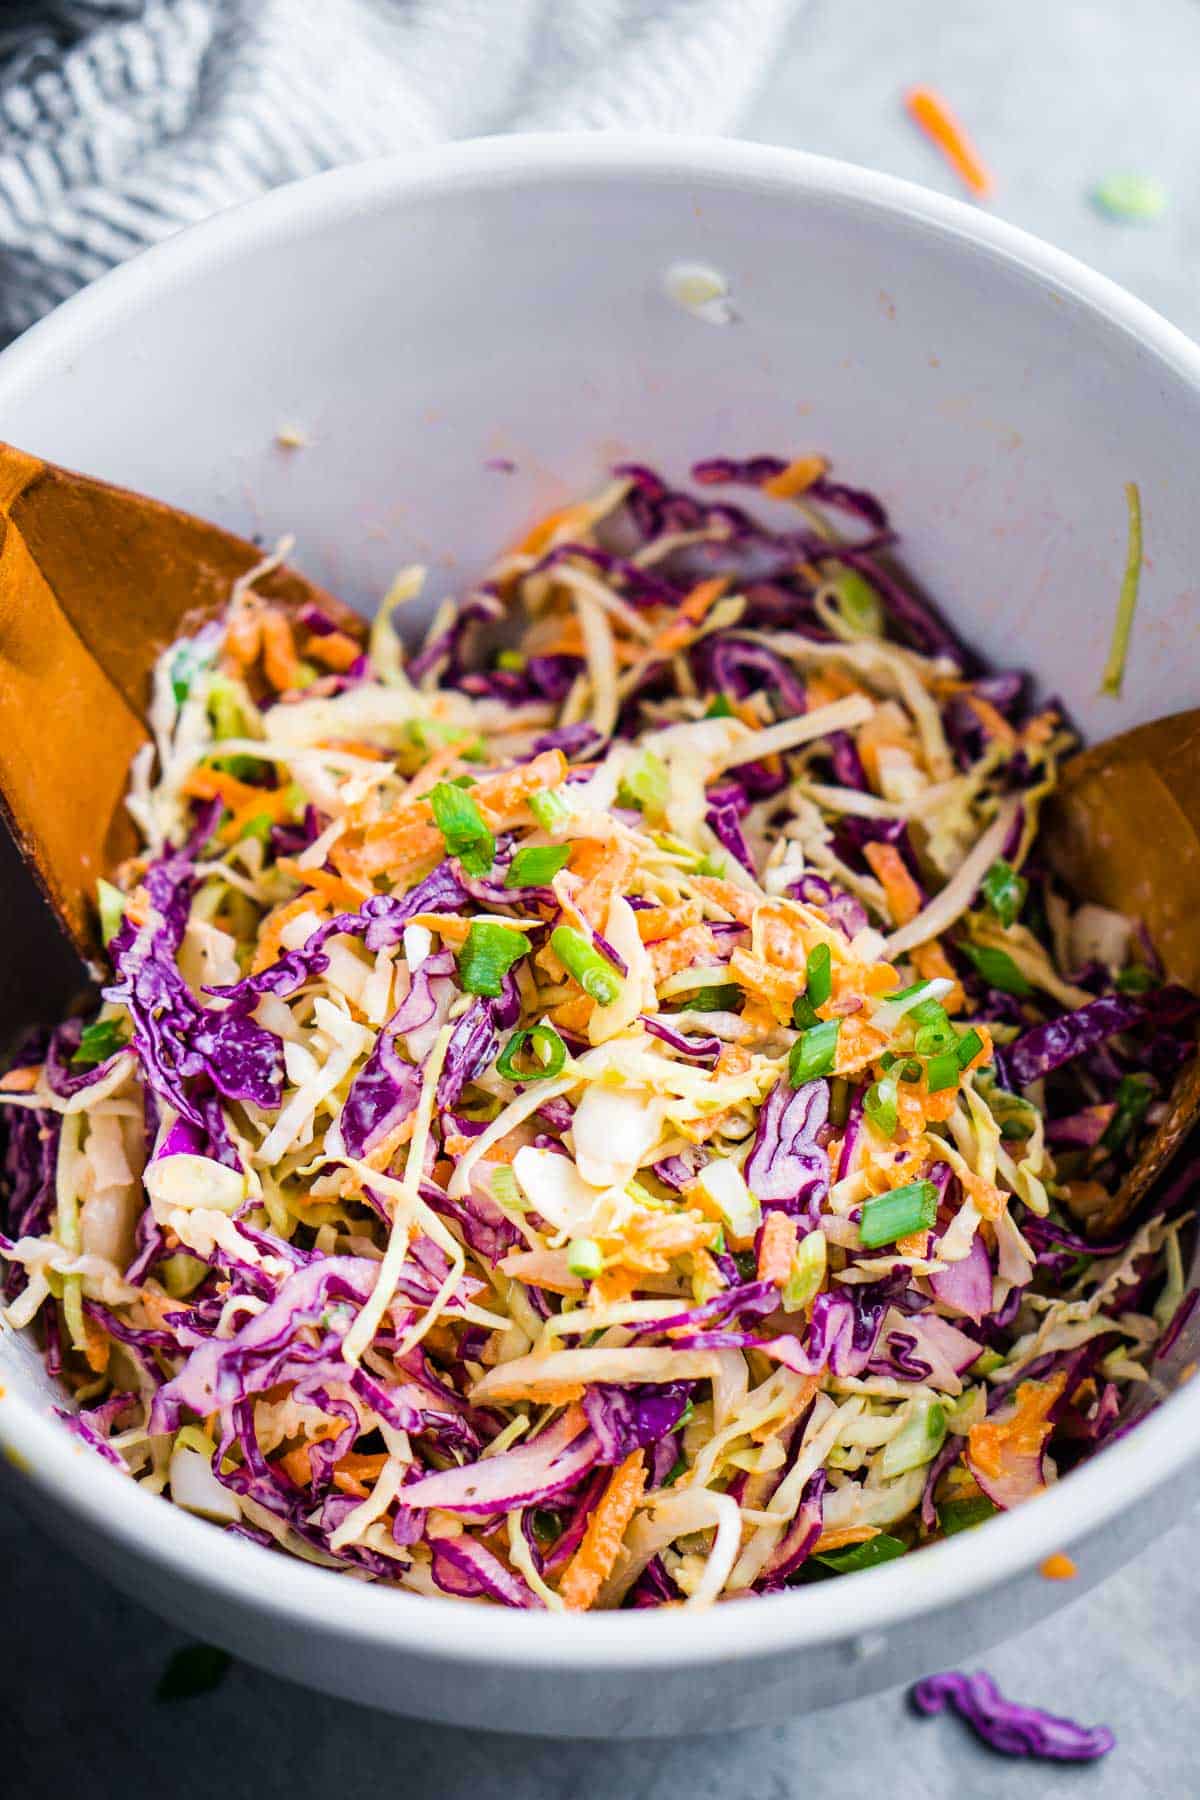 coleslaw ingredients in white bowl being tossed by wooden salad tongs